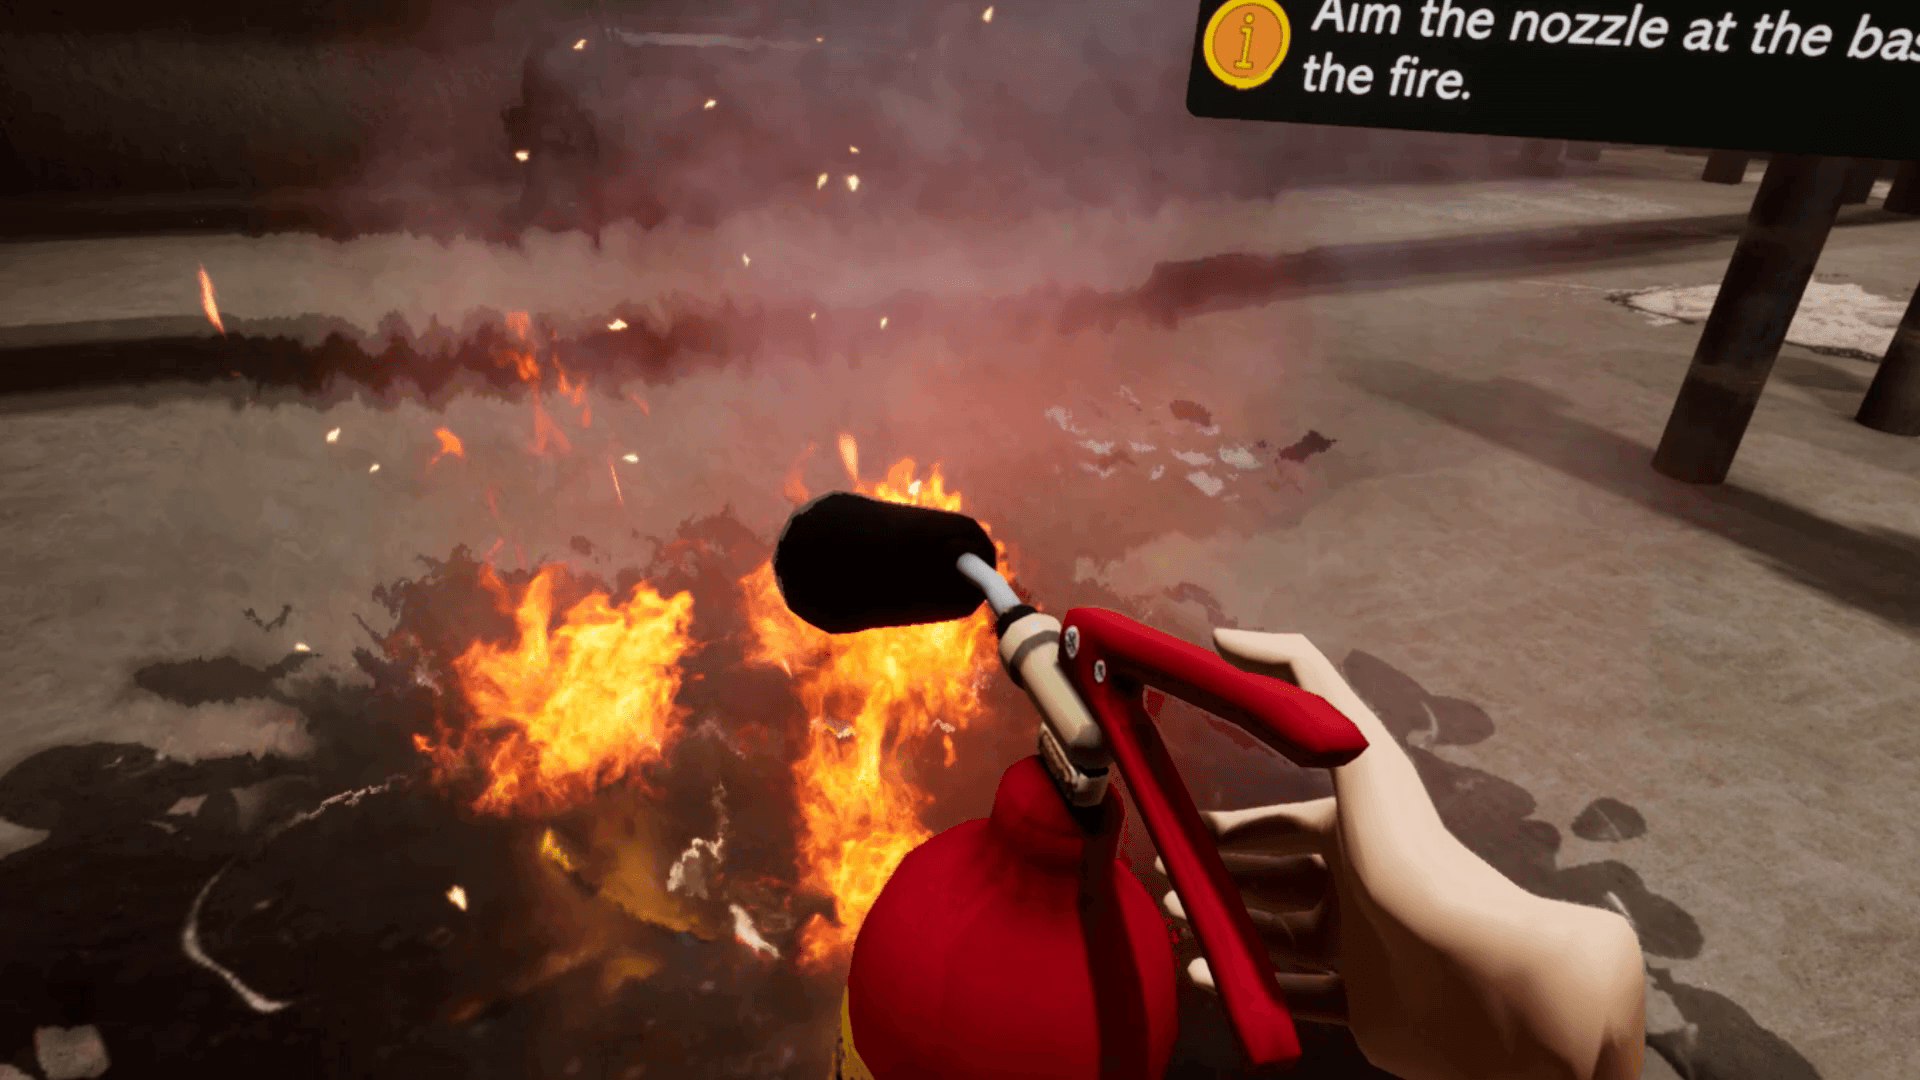 Practicing fire safety drill in a VR environment.